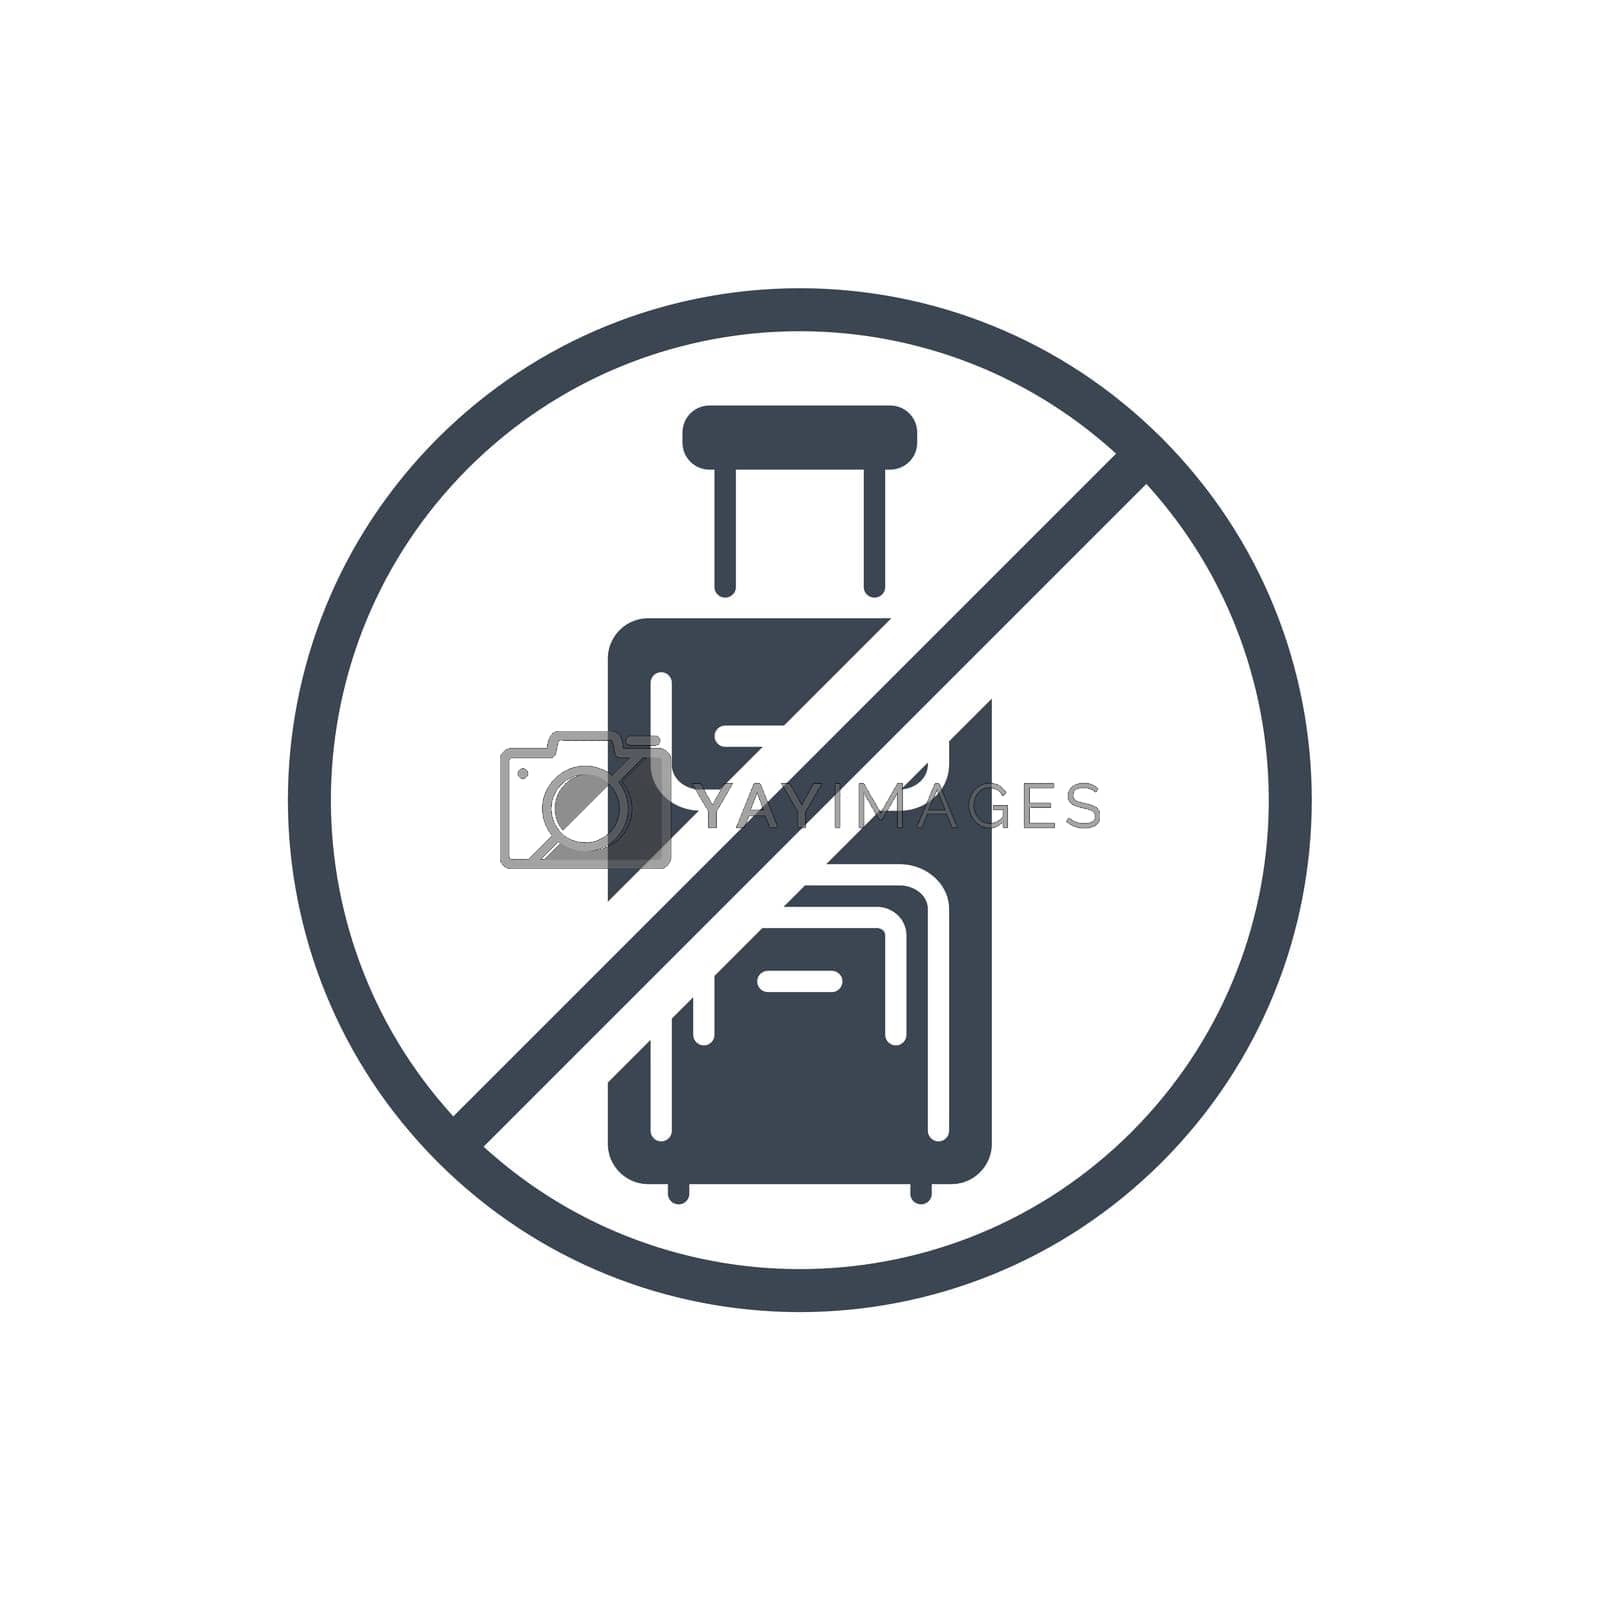 Avoid travel related vector glyph icon. Travel suitcase placed in prohibition sign. Isolated on white background. Editable vector illustration